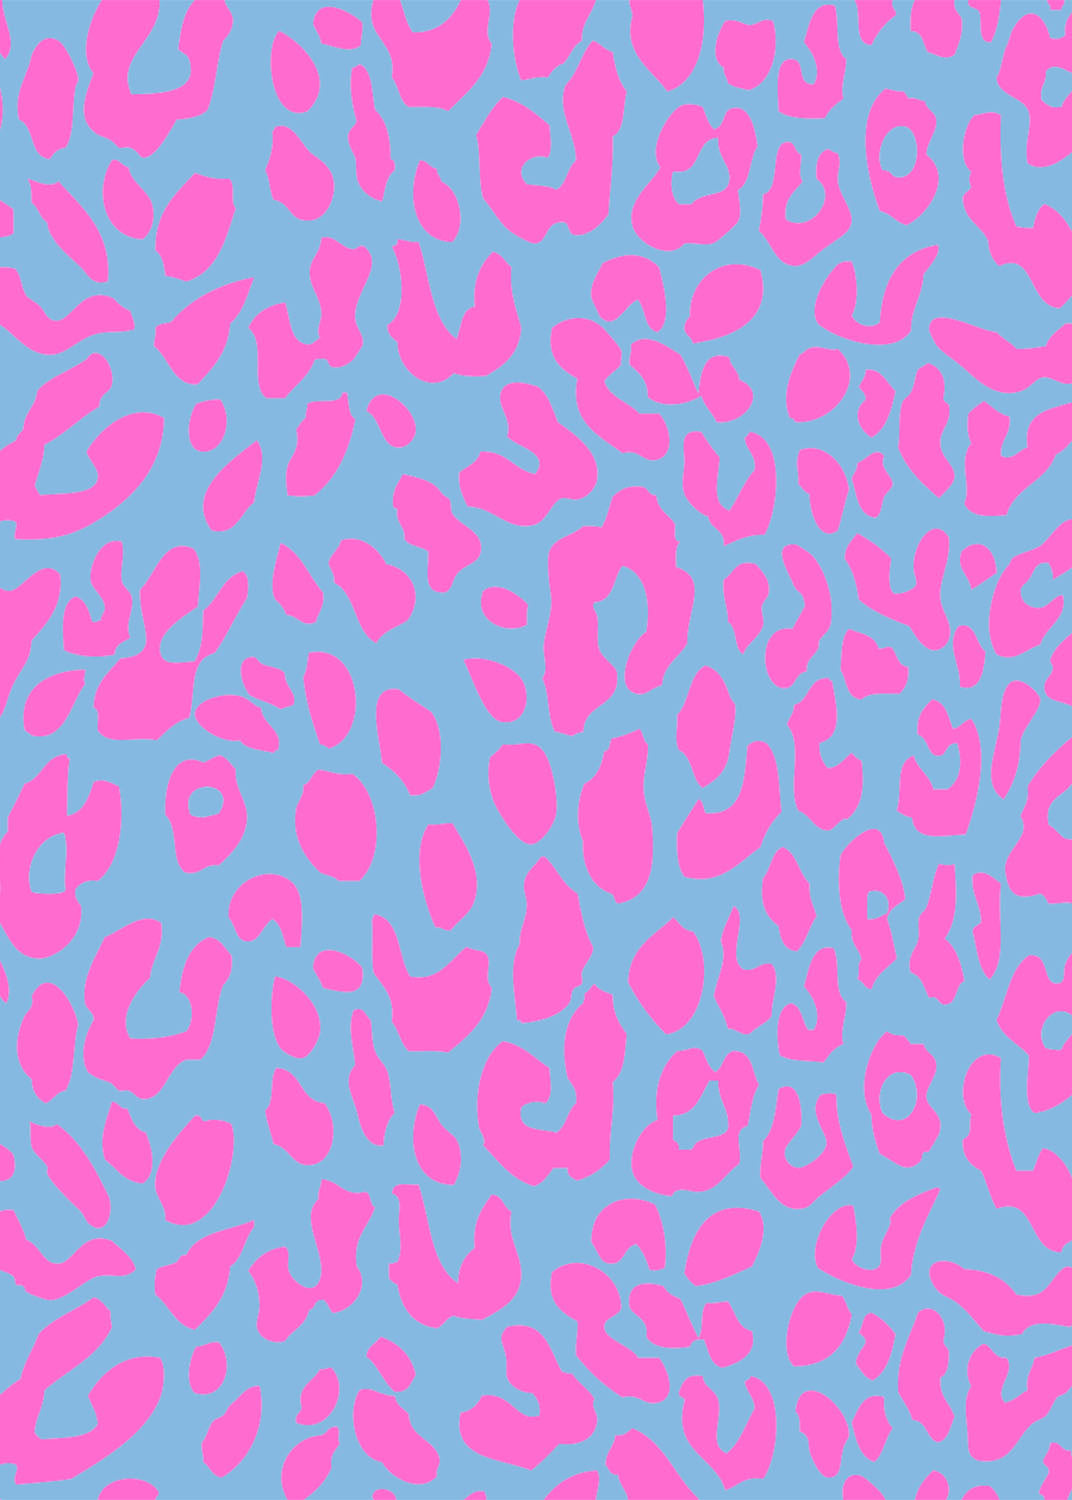 Yacht Club Shift - Show your spots Blue/Pink